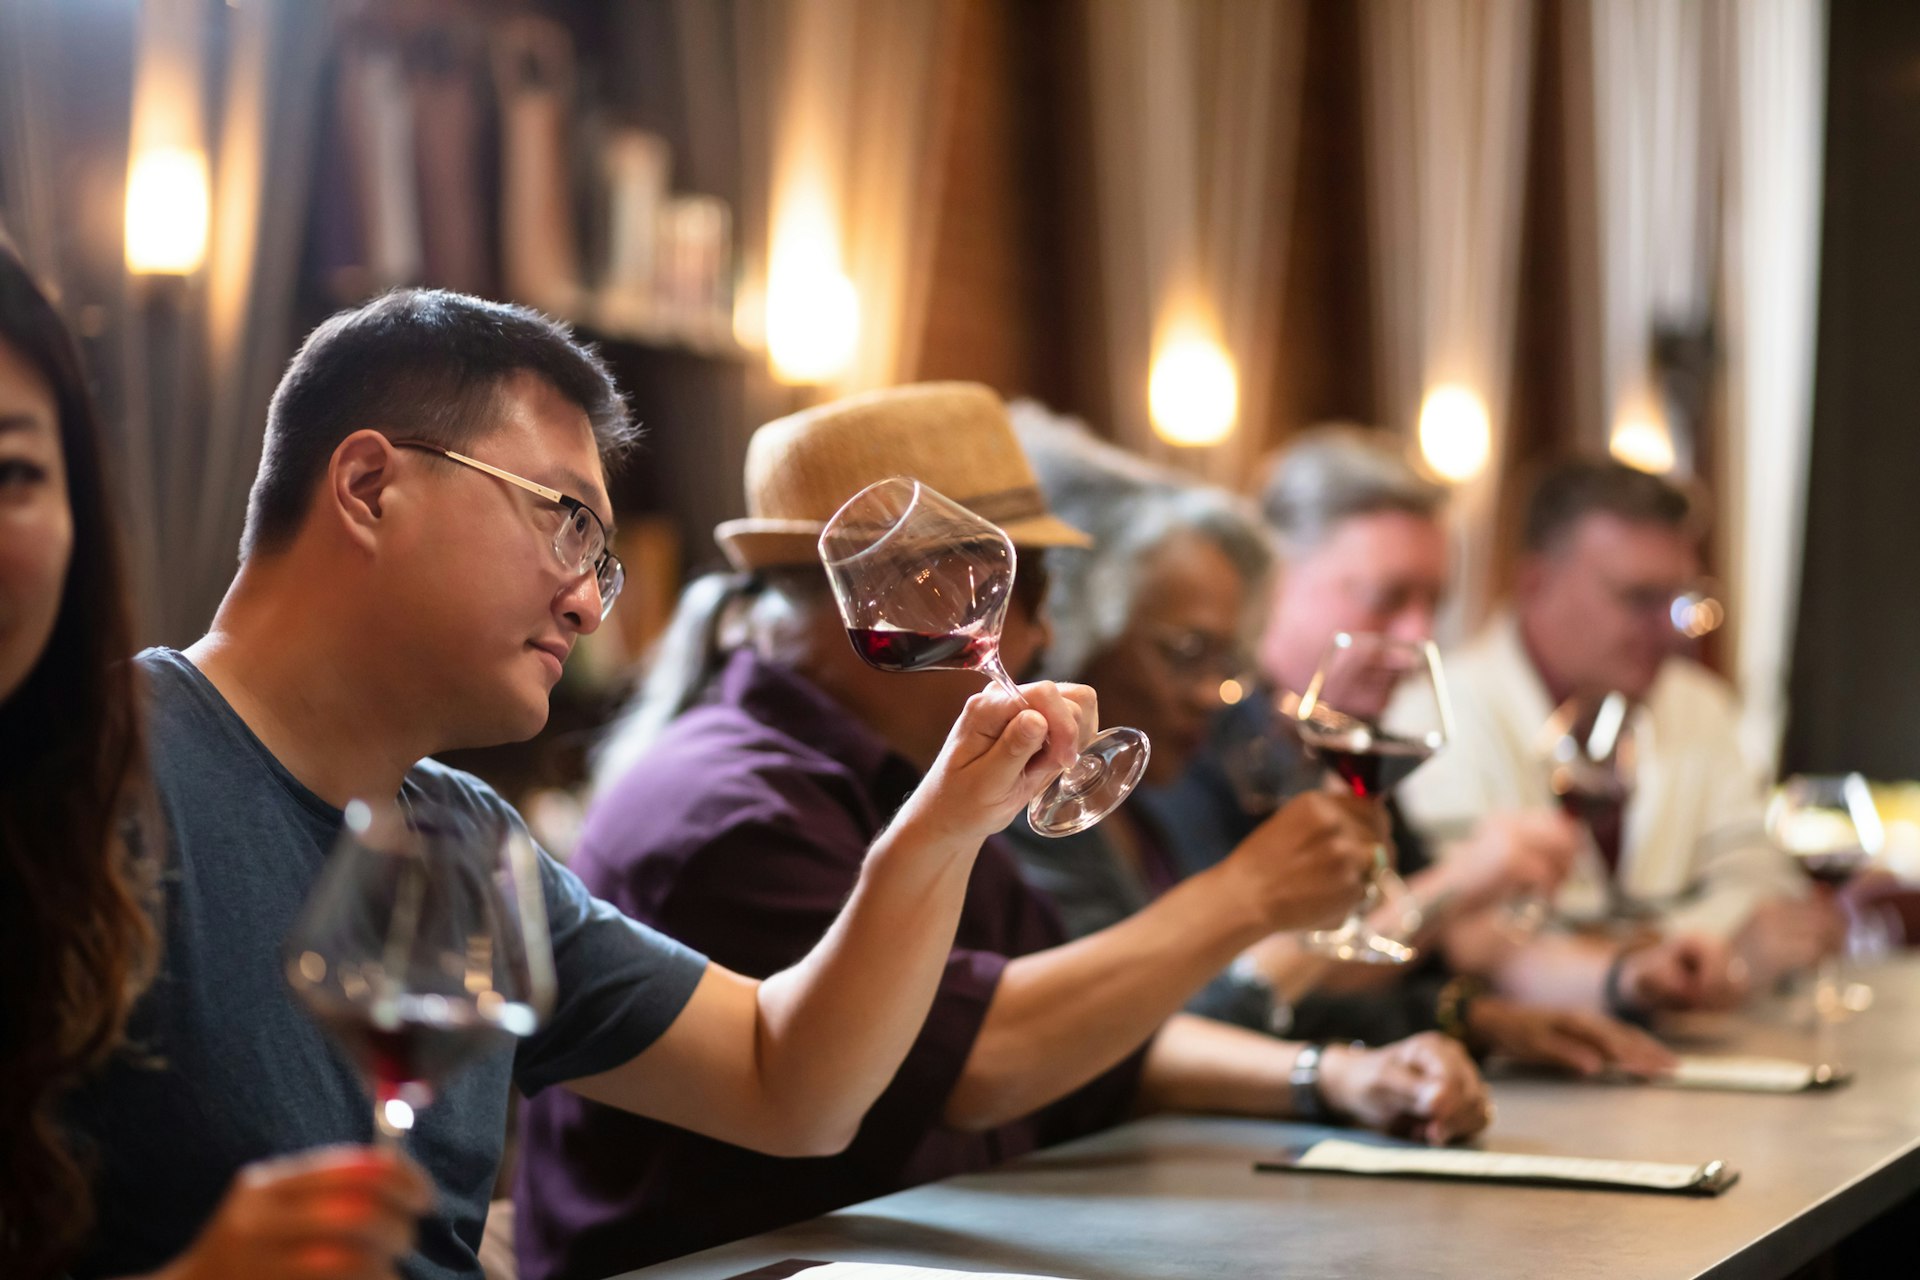 People at a bar in a wine tasting room inspect the wine in their glasses 